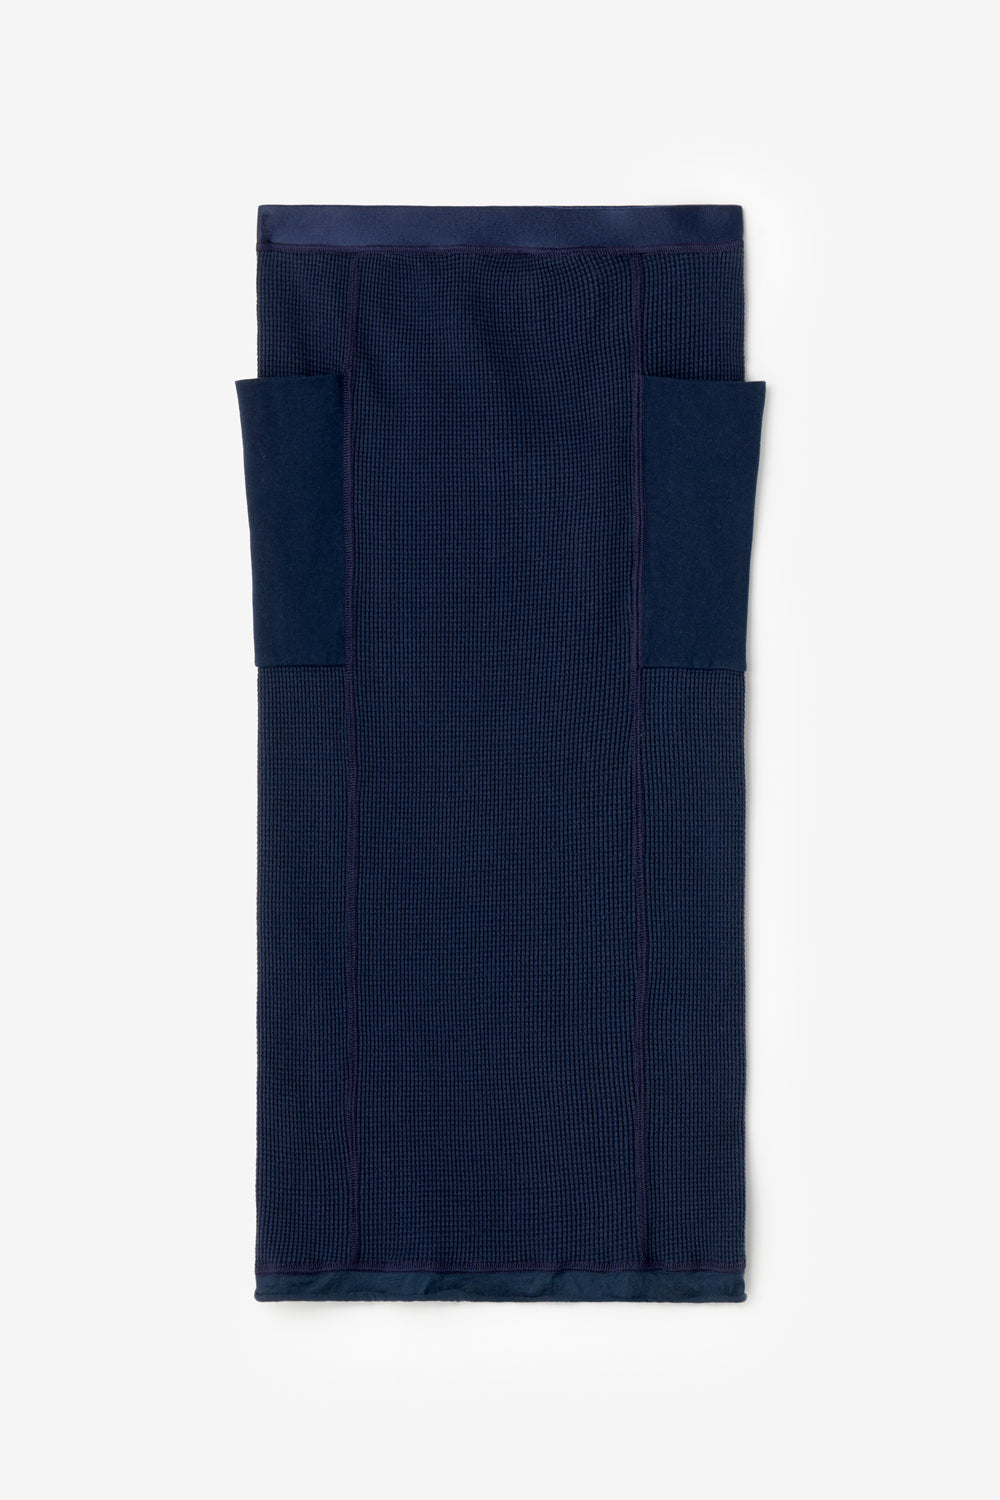 Chelsea Skirt in navy made with organic waffle fabric and cotton jersey pockets.